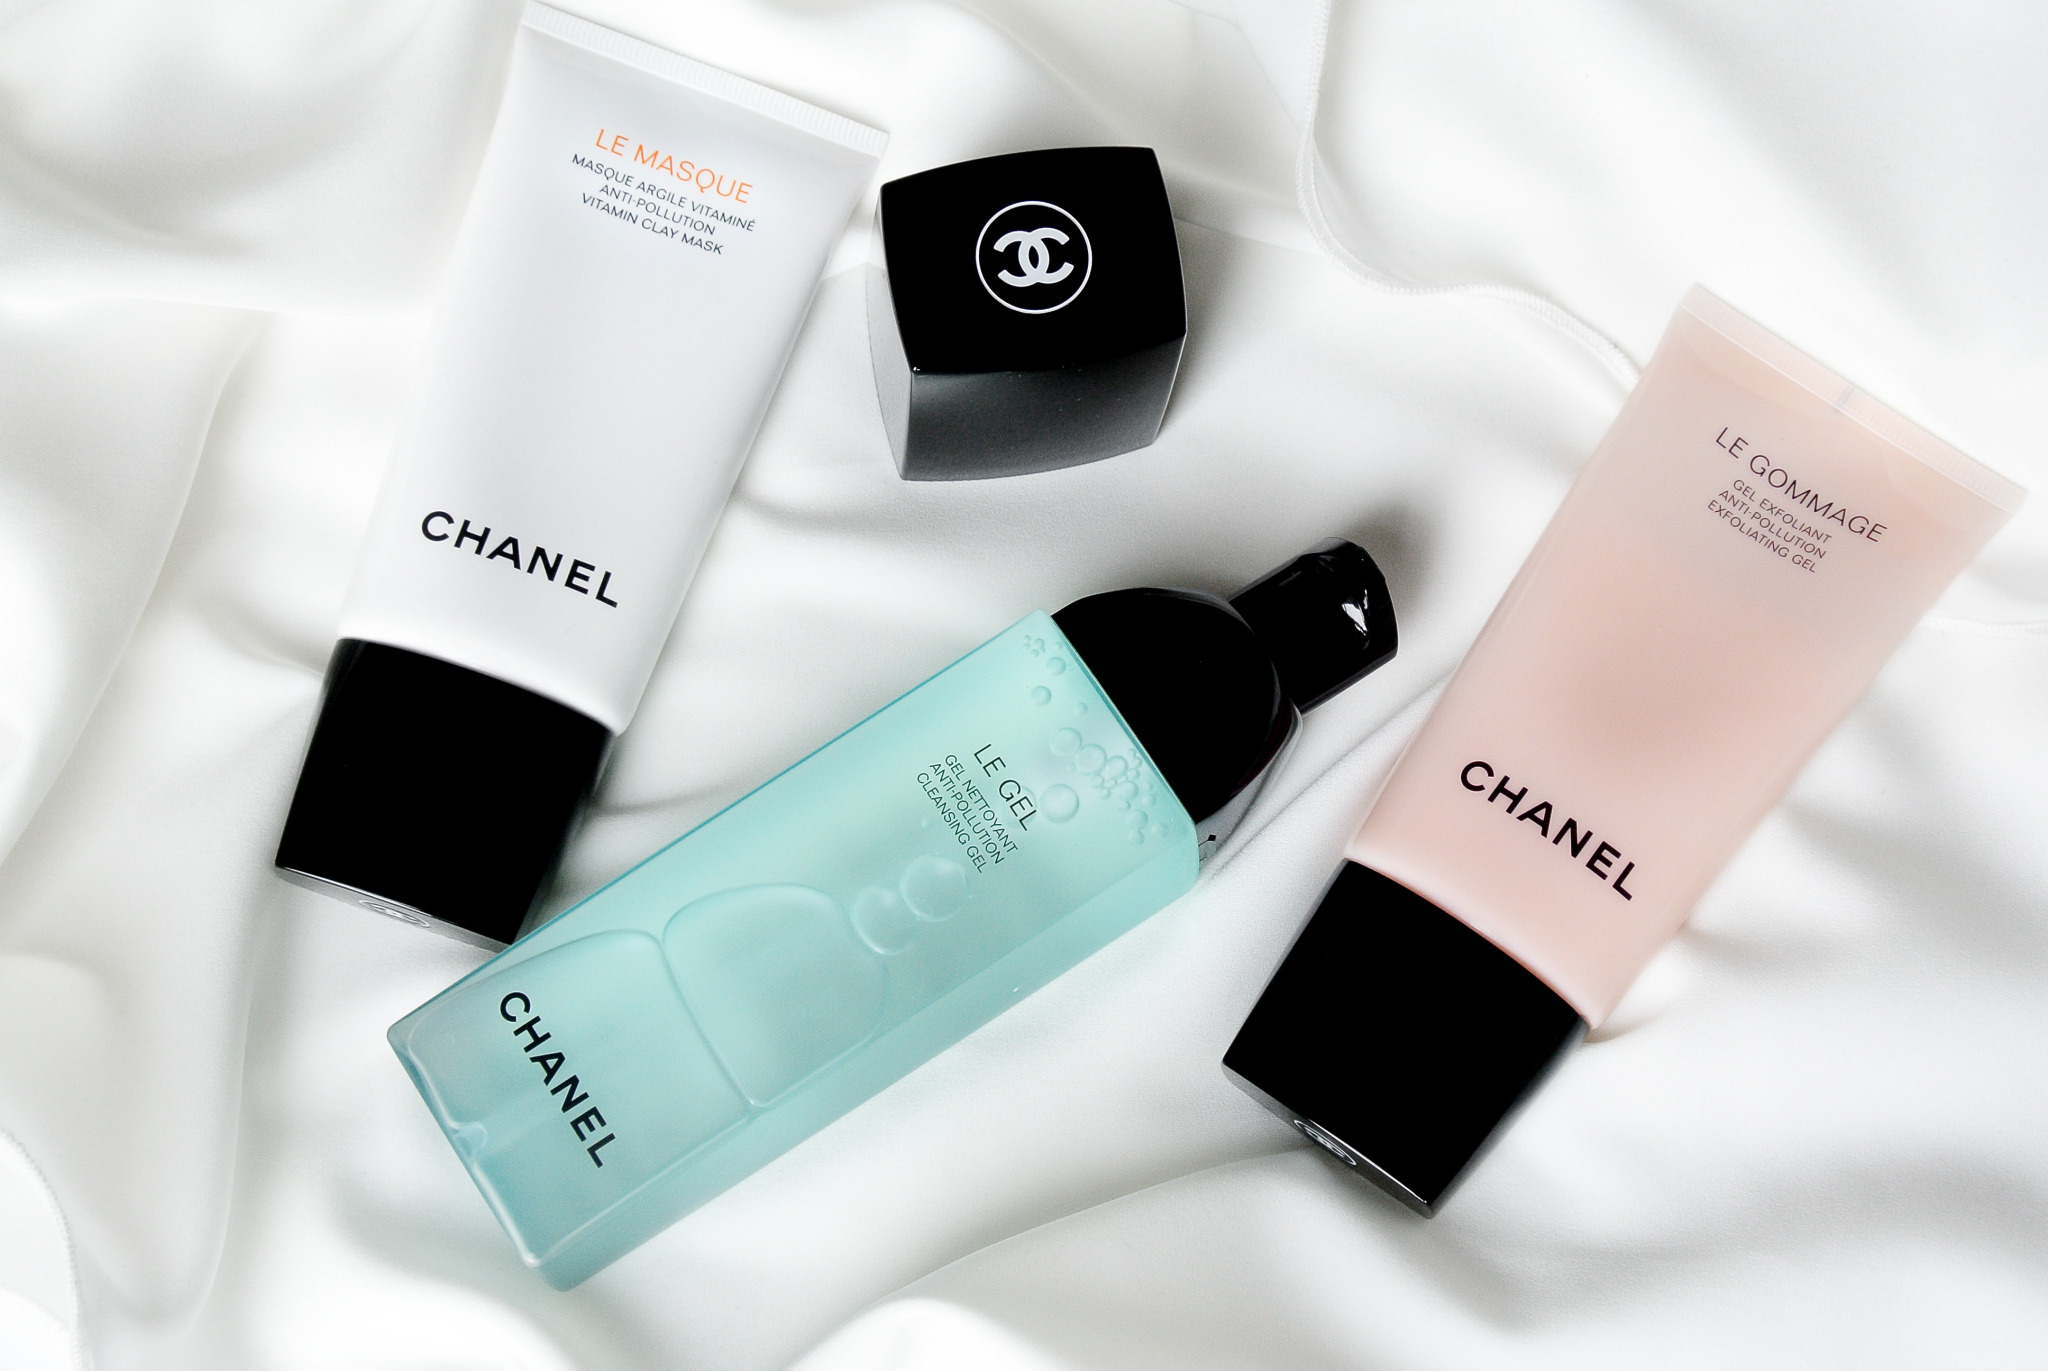 CHANEL The Cleansing Collection - Anita Michaela